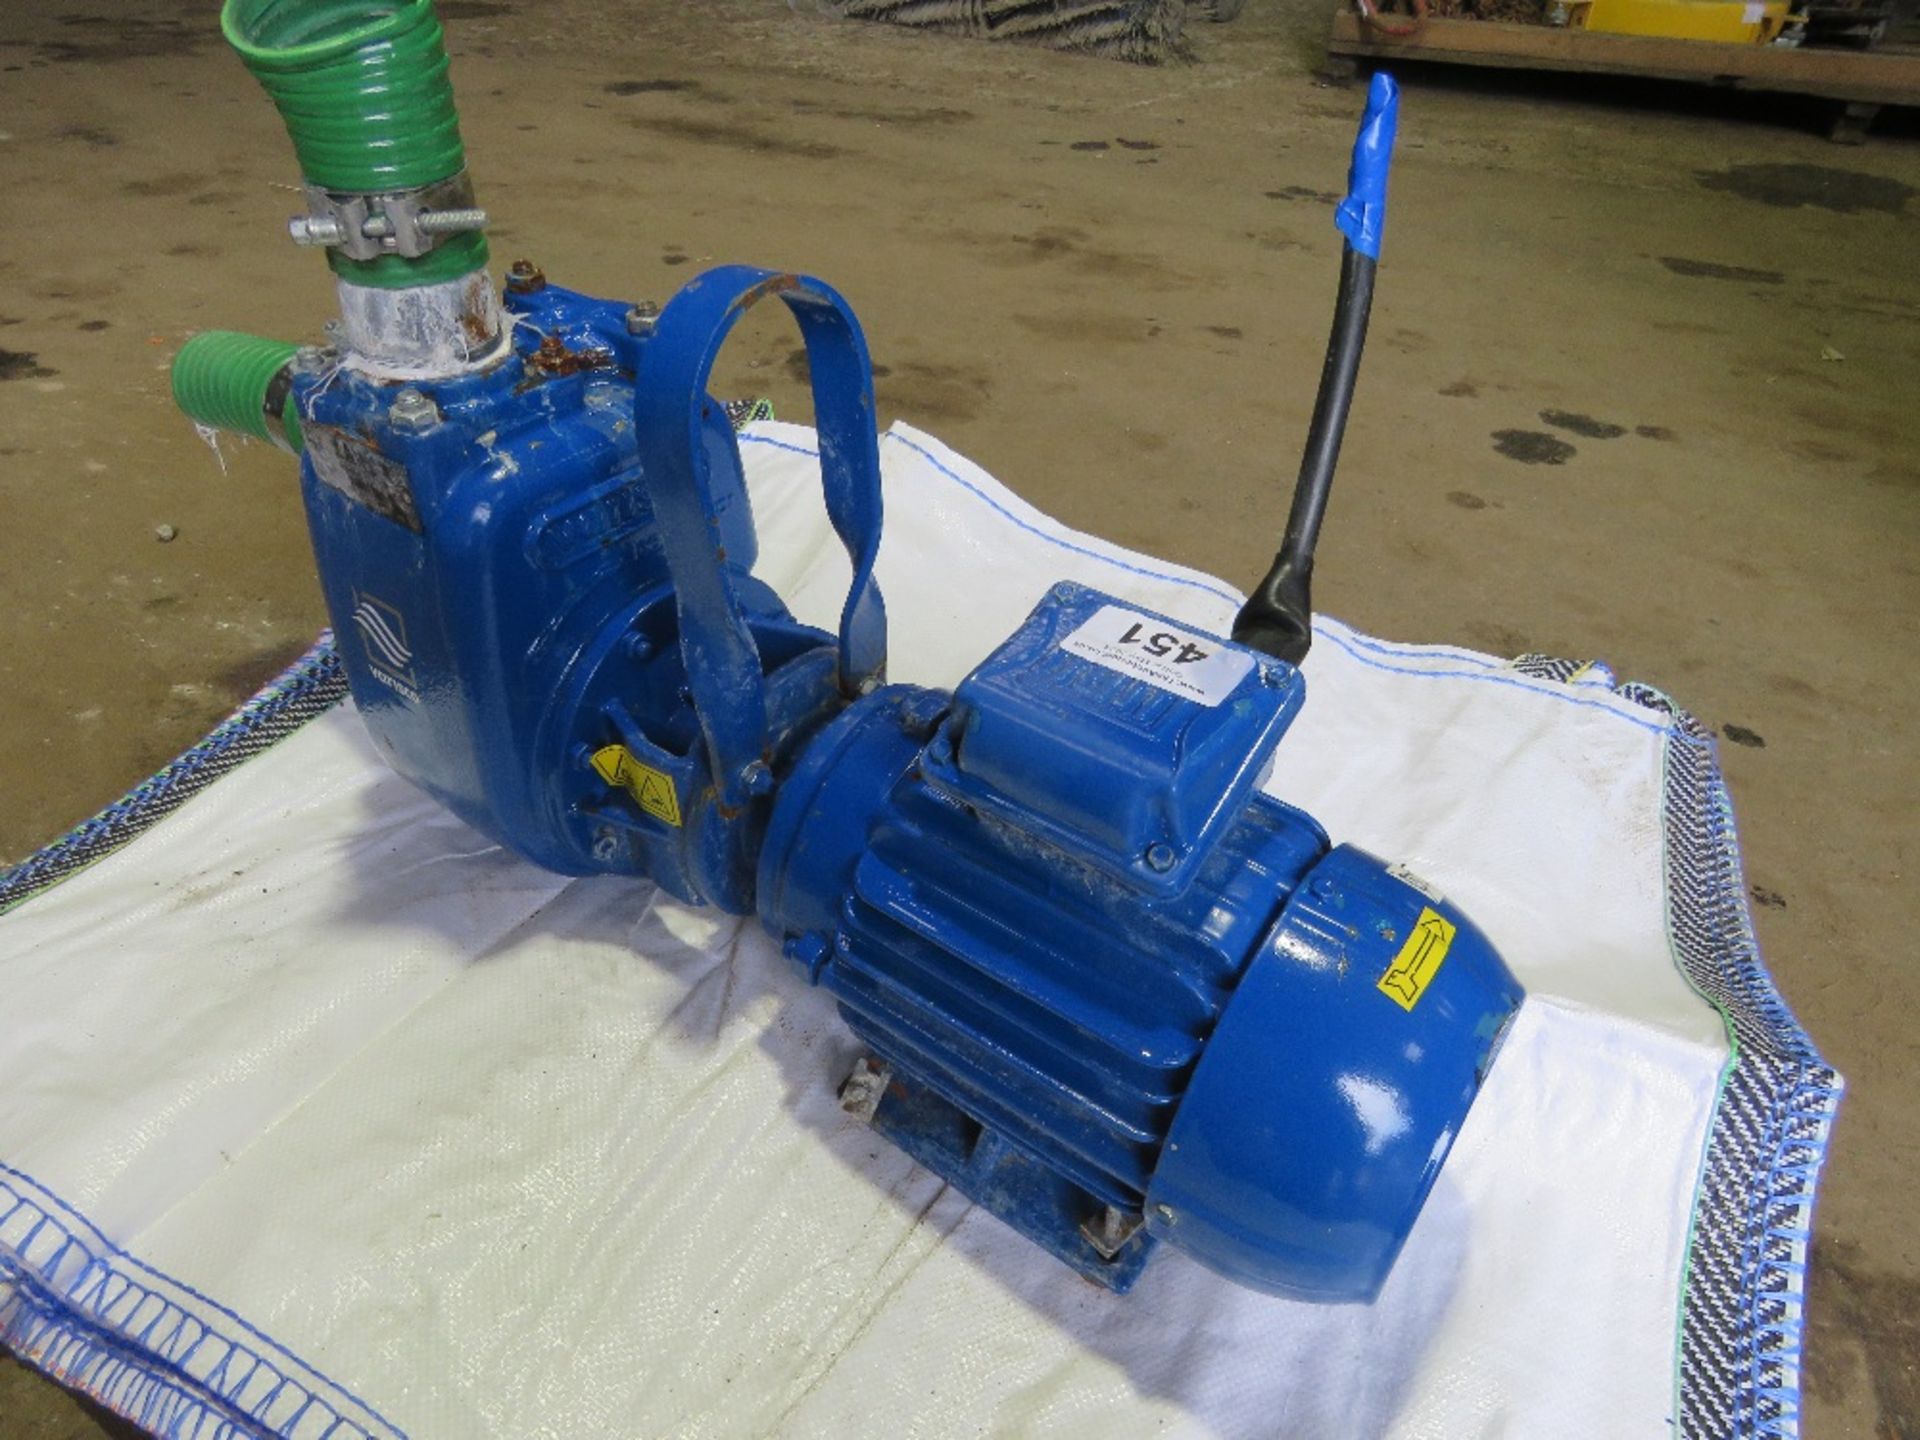 HIGH VOLUME WATER PUMP. WORKING WHEN REMOVED. DONE 4 MONTHS WORK ONLY. SOURCED FROM COMPANY LIQUIDA - Image 2 of 3